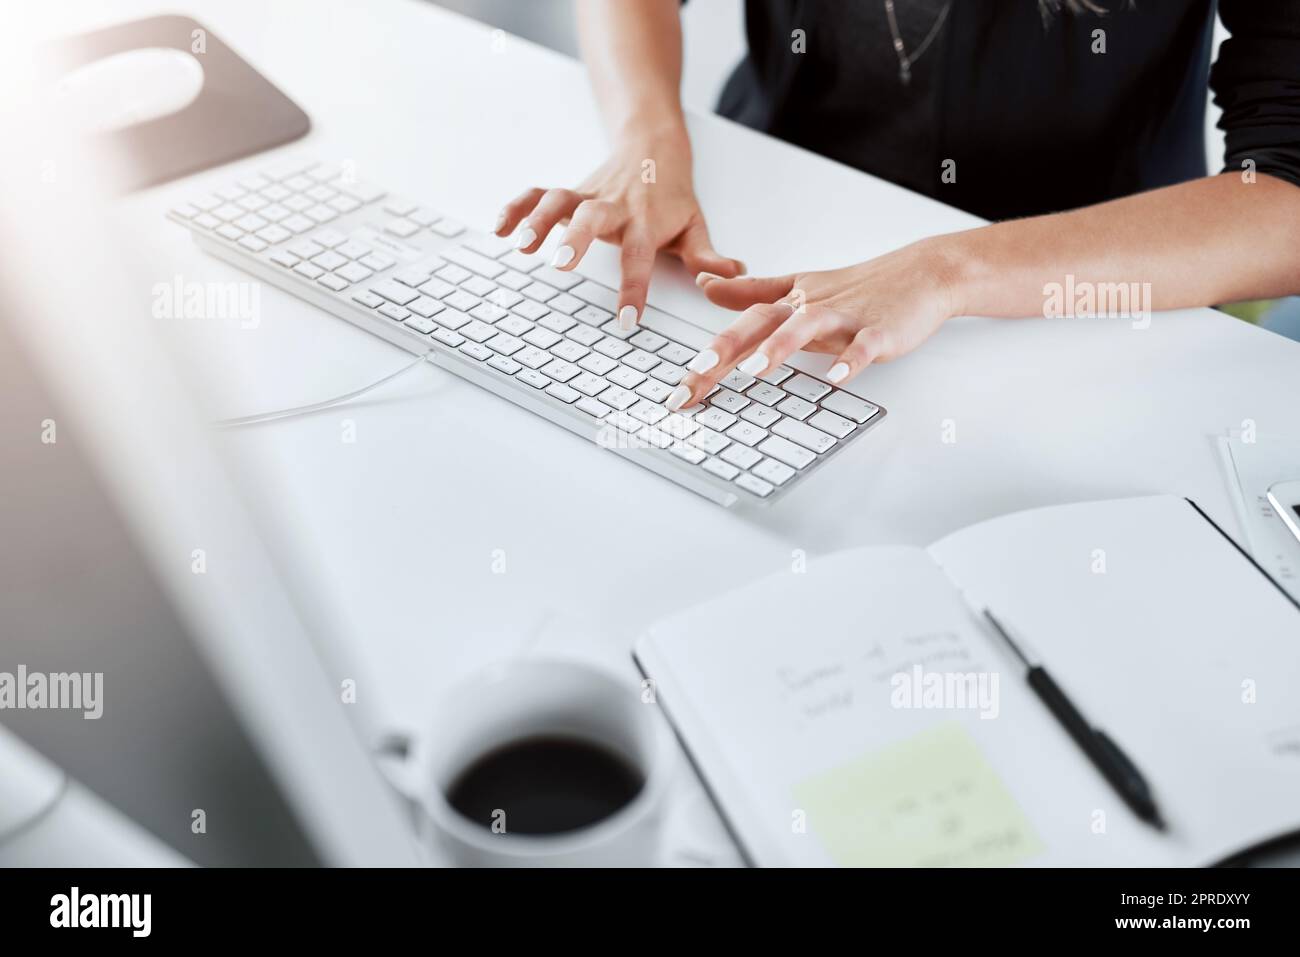 Flying across the keyboard at lightening speed. a businesswoman using a computer at her desk in a modern office. Stock Photo